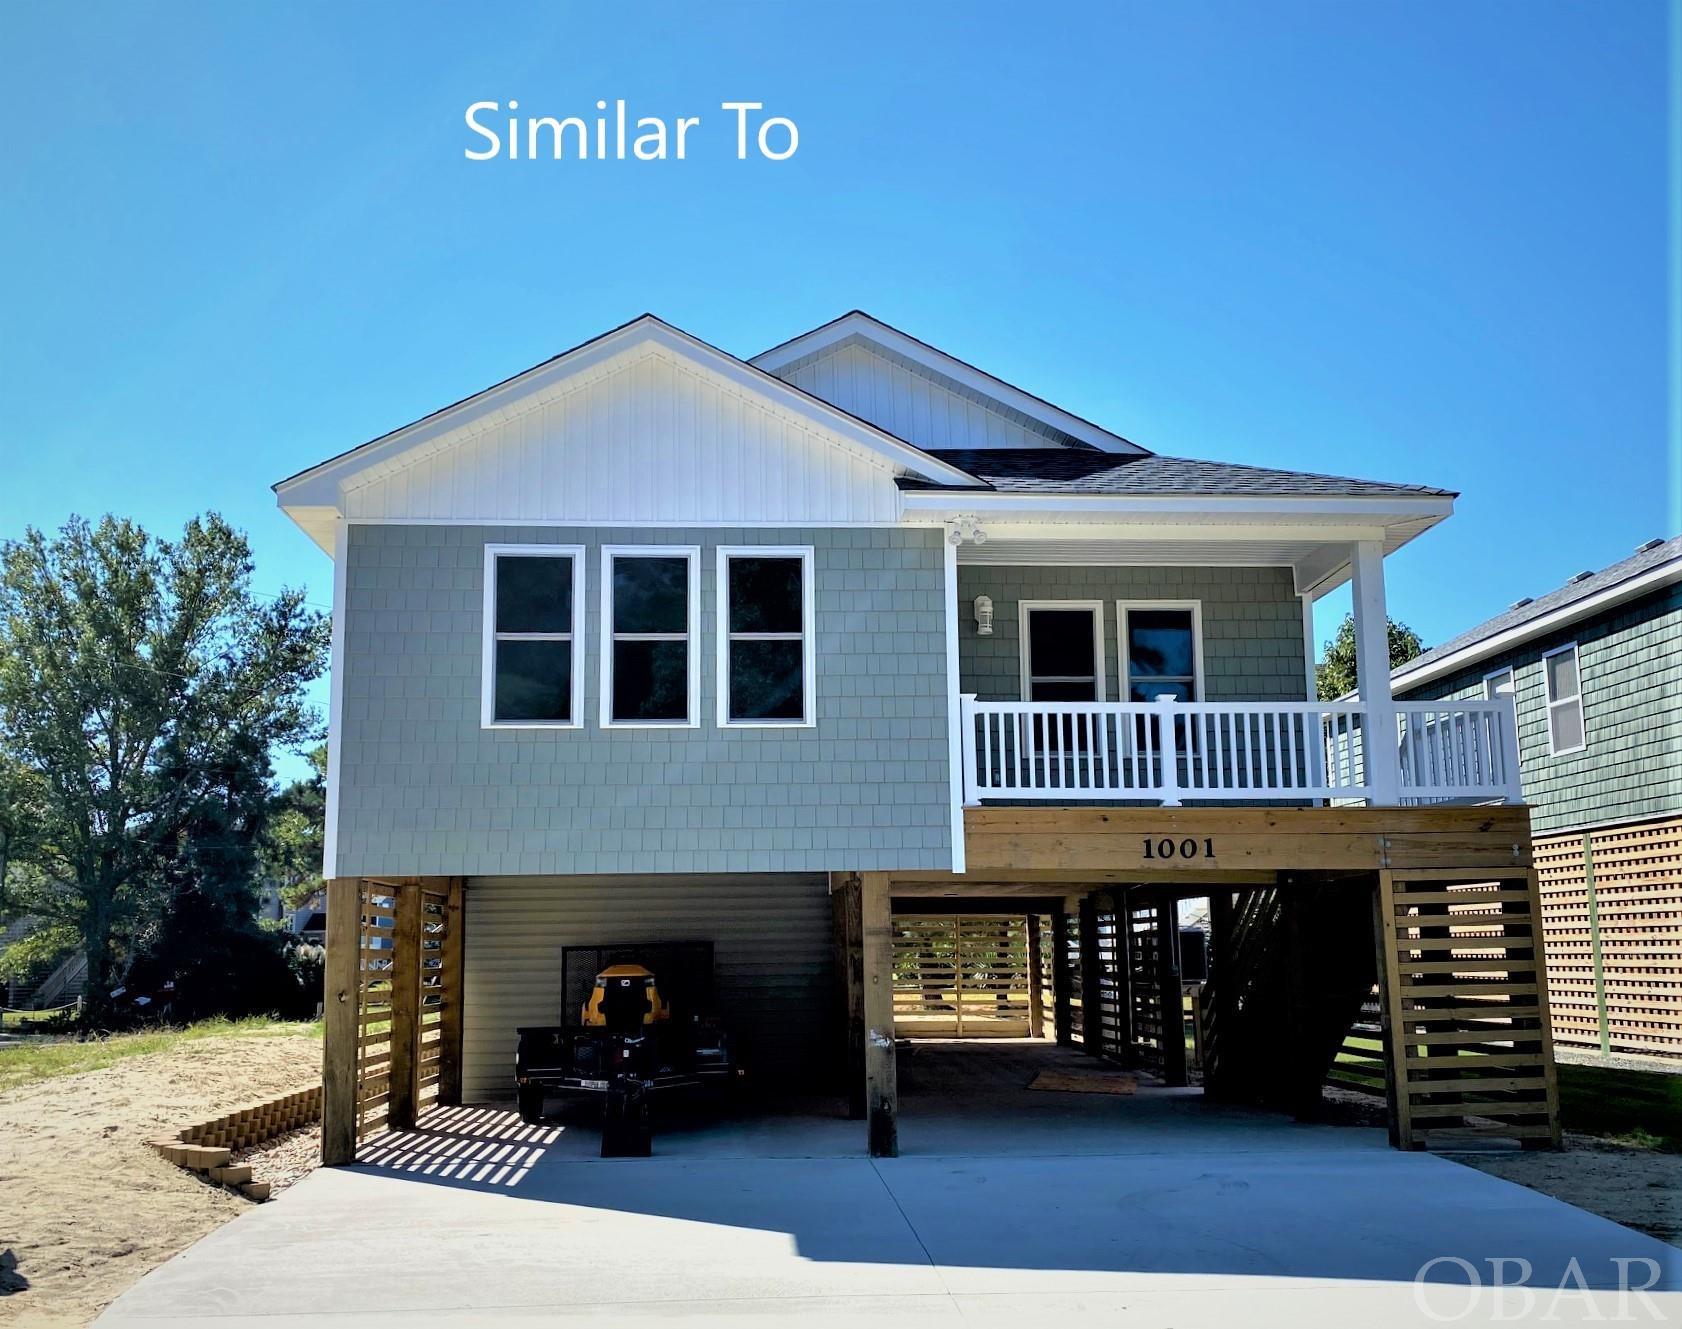 706 Colington Drive lot 141 Outer Banks Home Listings - Holleay Parcker - Spinnaker Realty Outer Banks (OBX) Real Estate